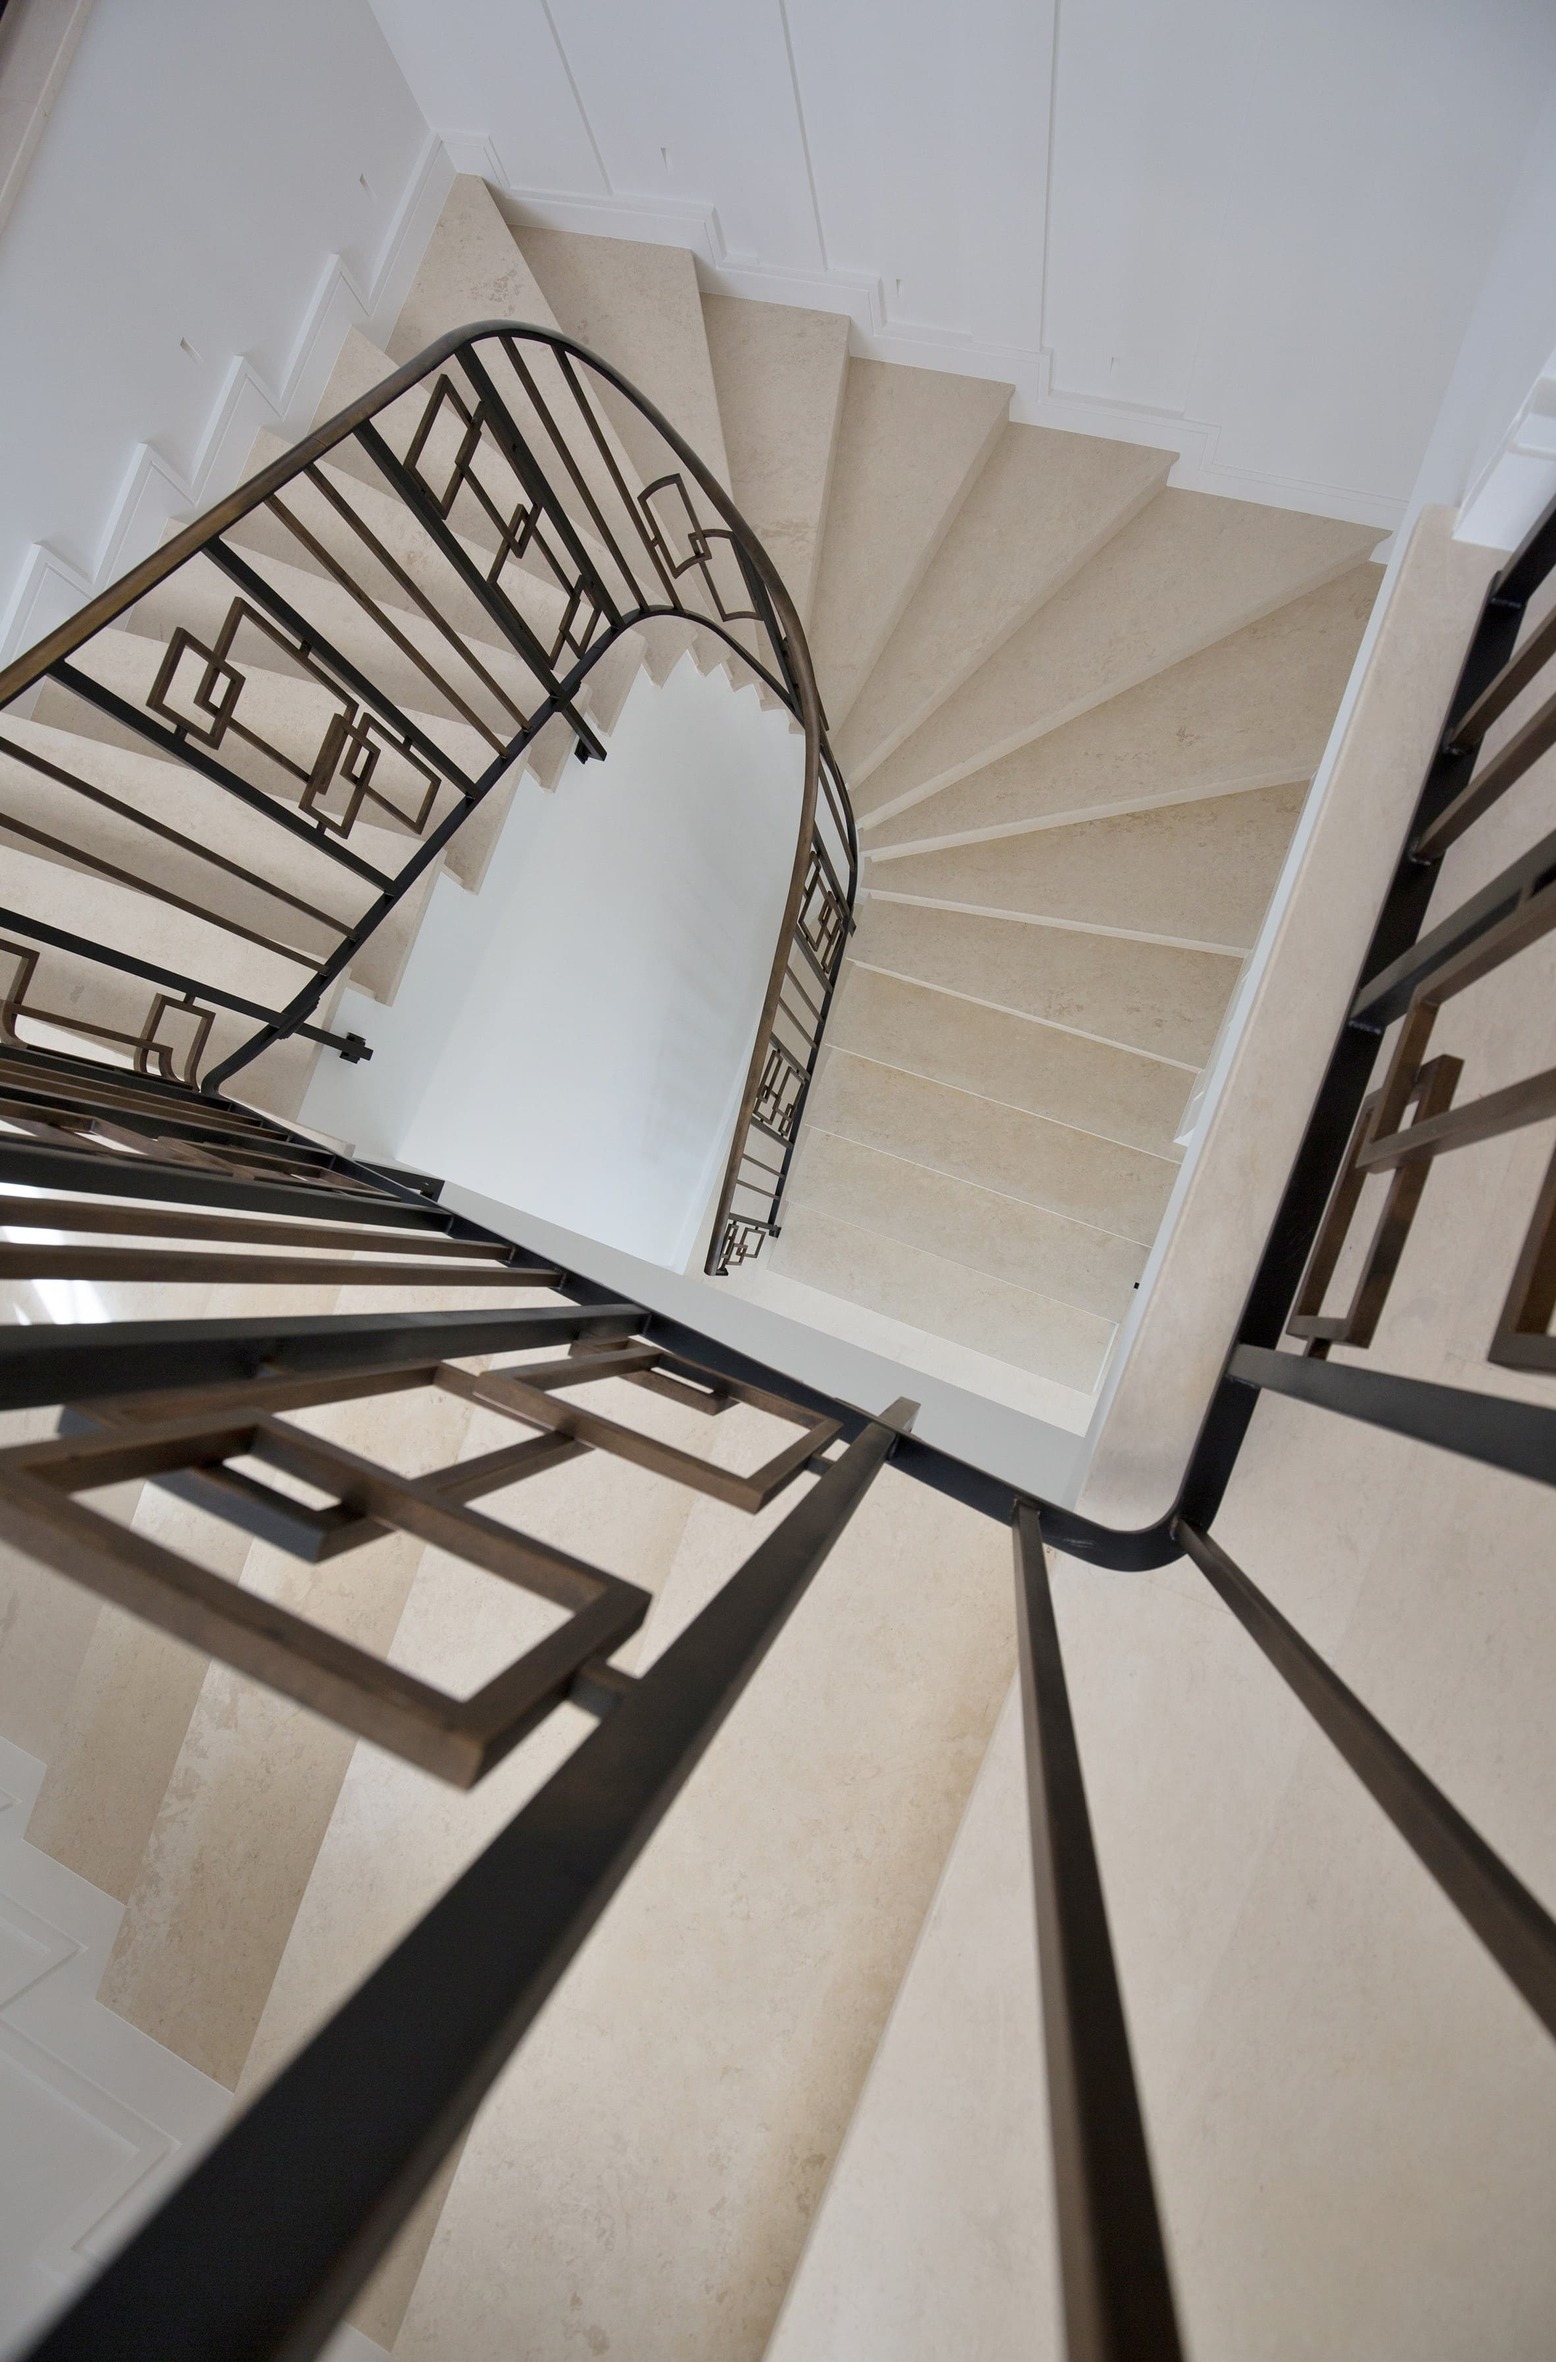 Oiseau-carat-diffusion-staircase2-residential-2015